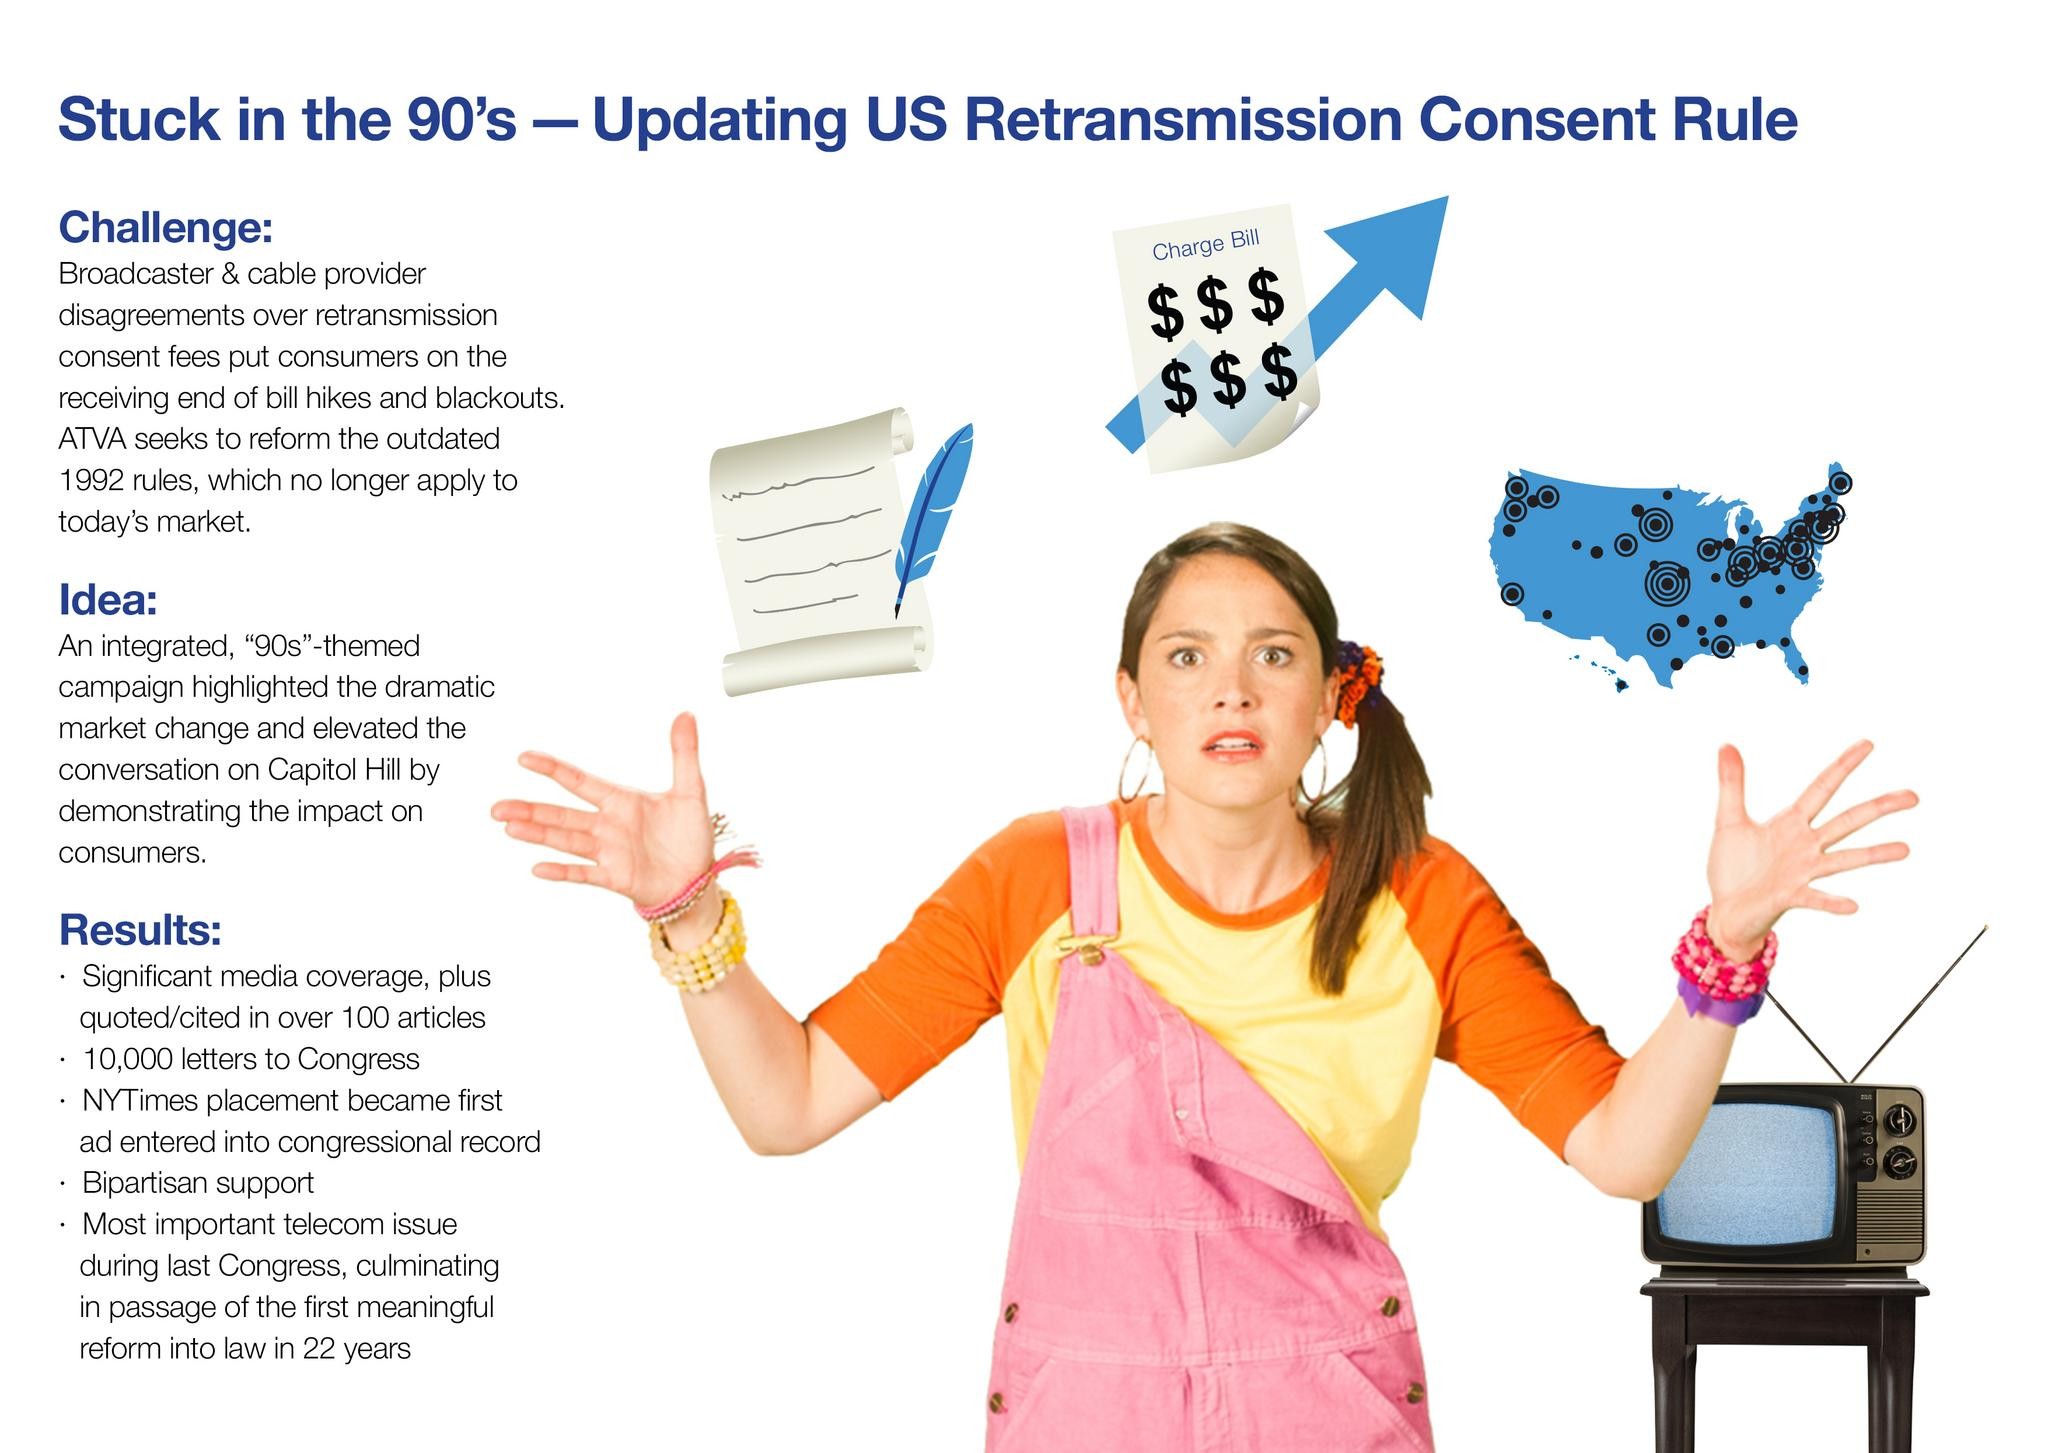 STUCK IN THE 90S – UPDATING US RETRANSMISSION CONSENT